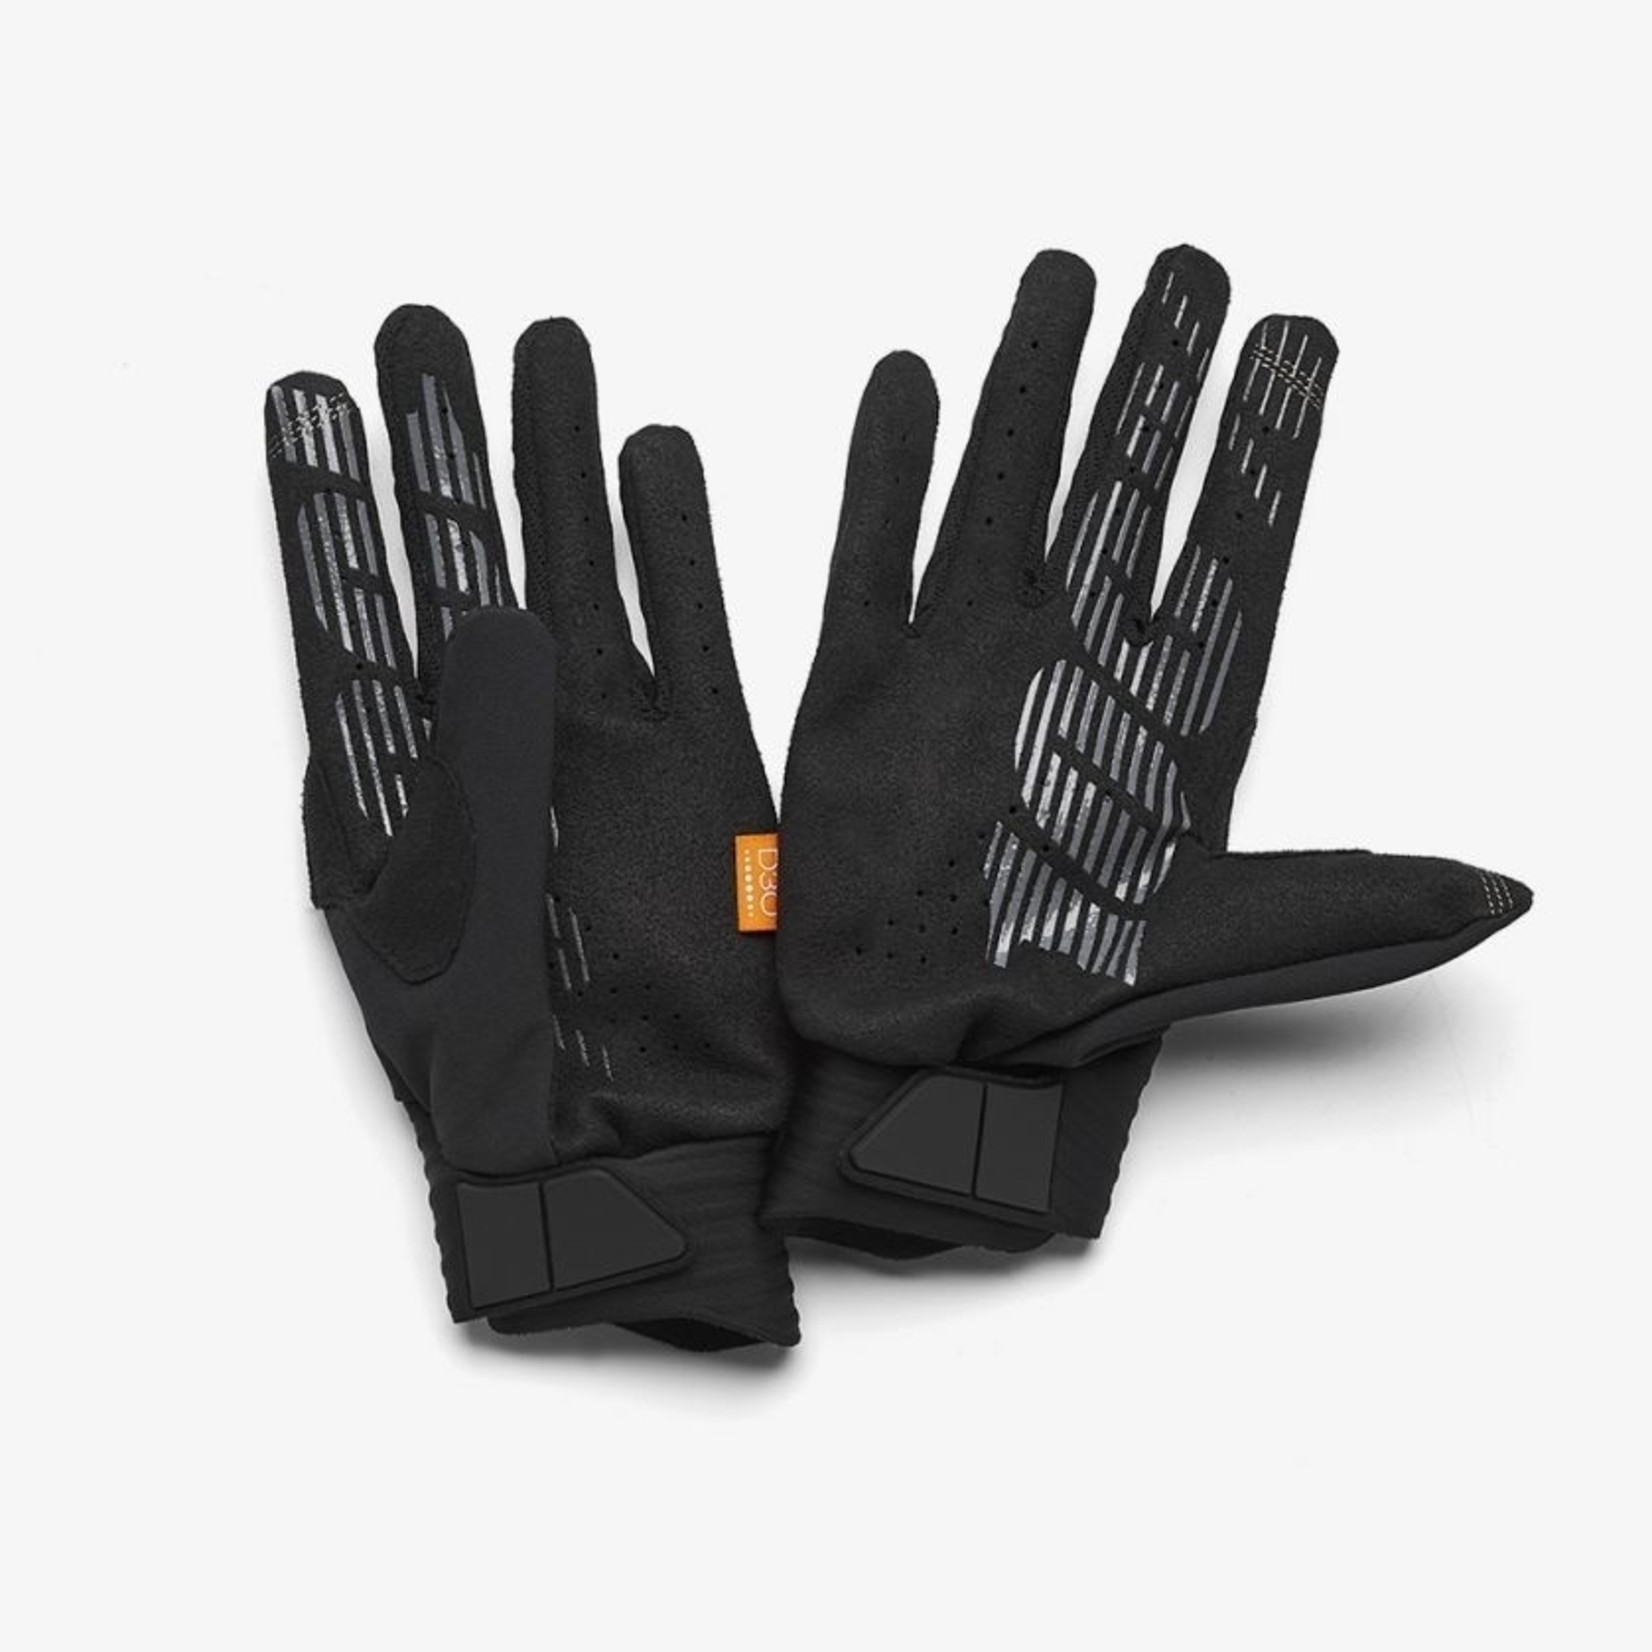 100% COGNITO D30 Cycling Glove - Black/Charcoal